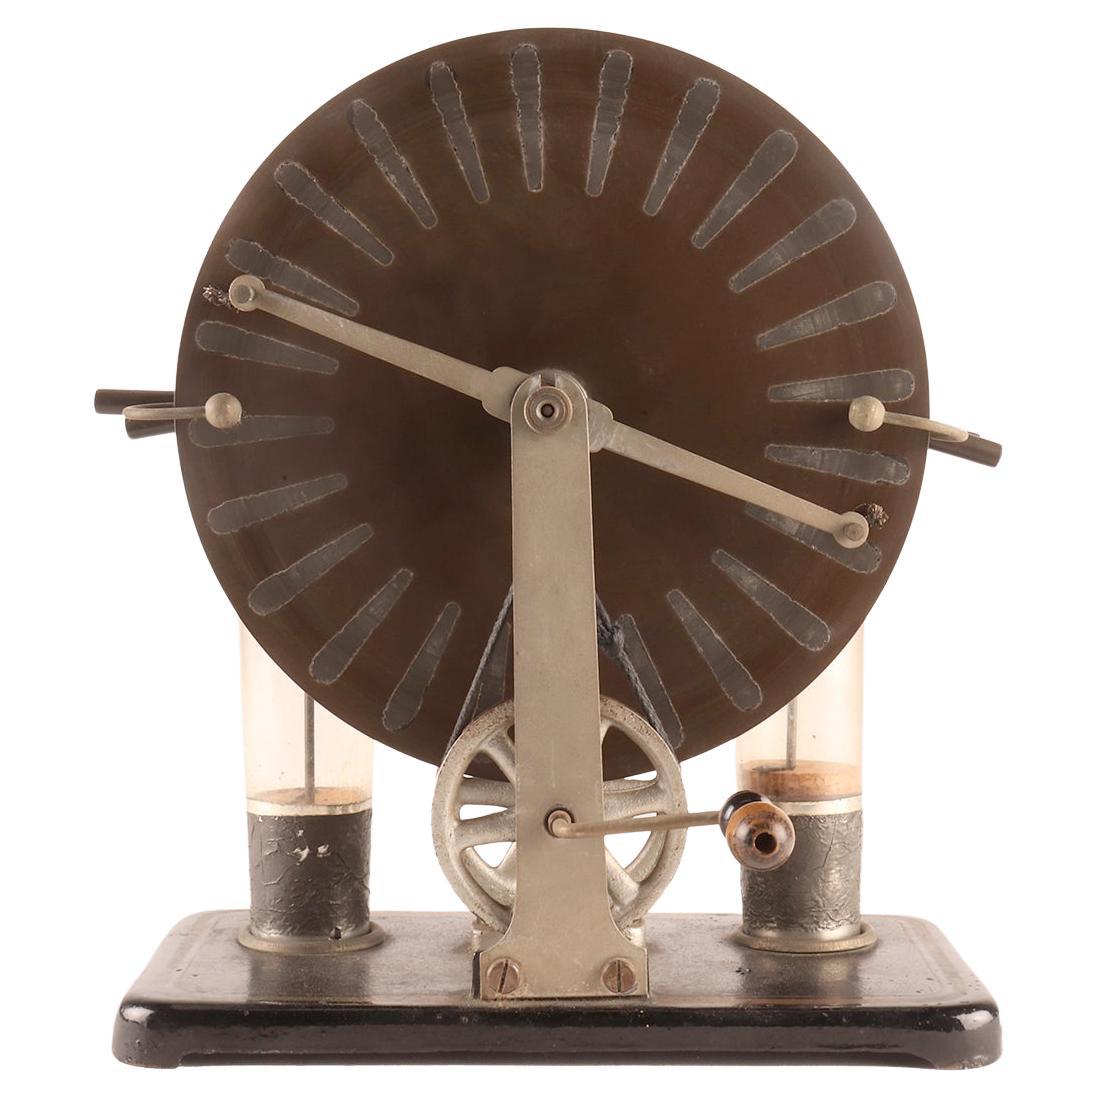 Electrostatic machine by Wimshurst, designed by Rinaldo Damiani, Italy 1900.  For Sale